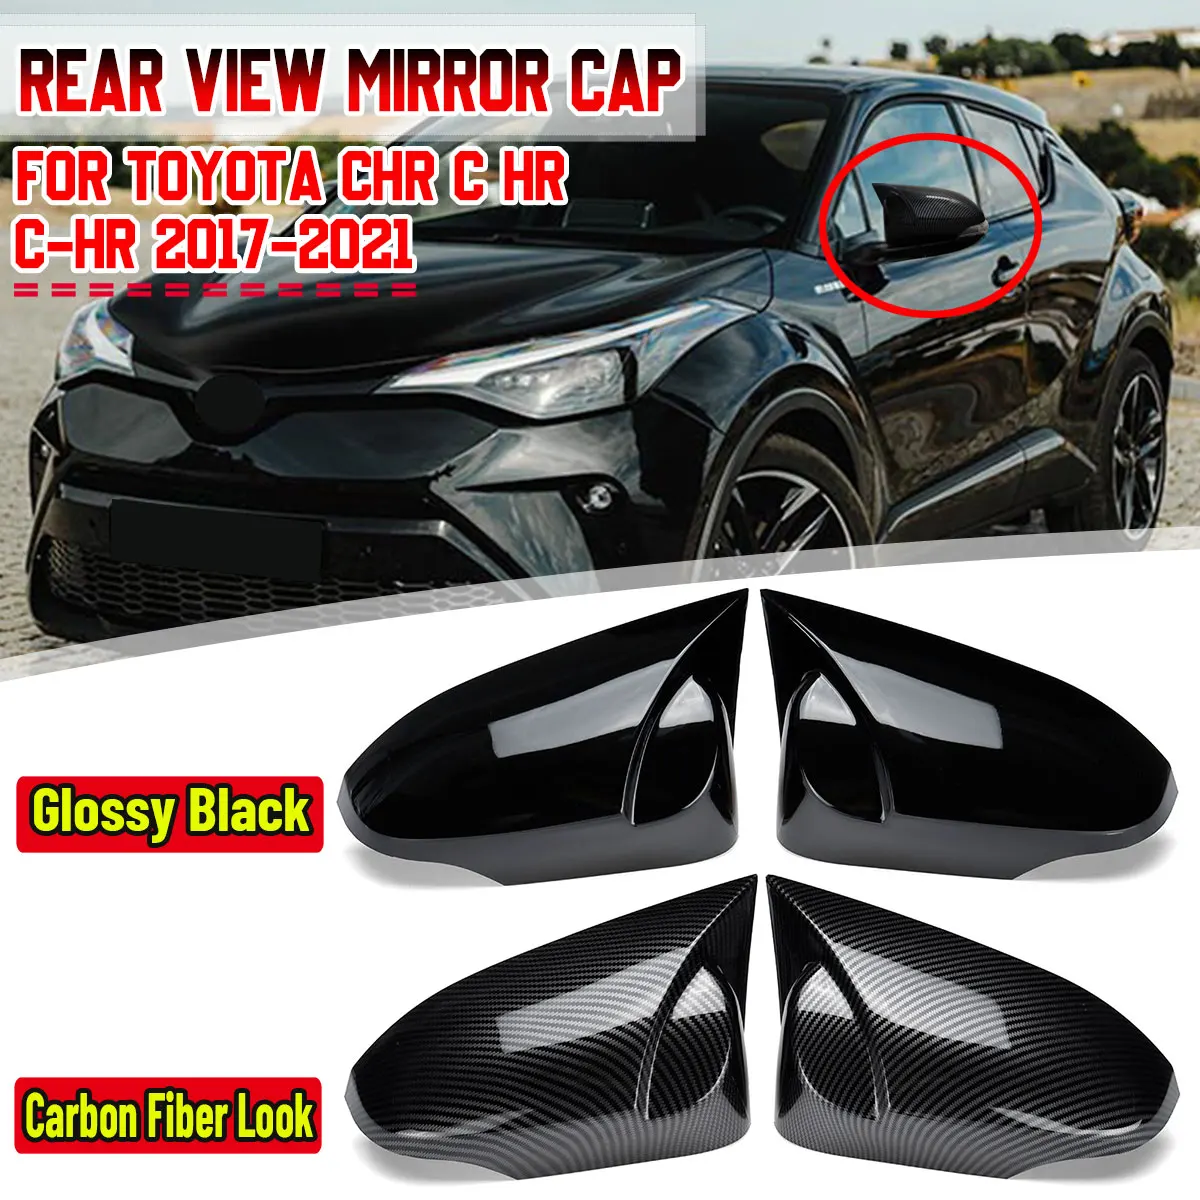 

2PCS Rearview Side Mirror Covers Cap For Toyota CHR C HR C-HR 2017-2021 For Toyota Corolla 2014-2017 Rear View Mirror Cover